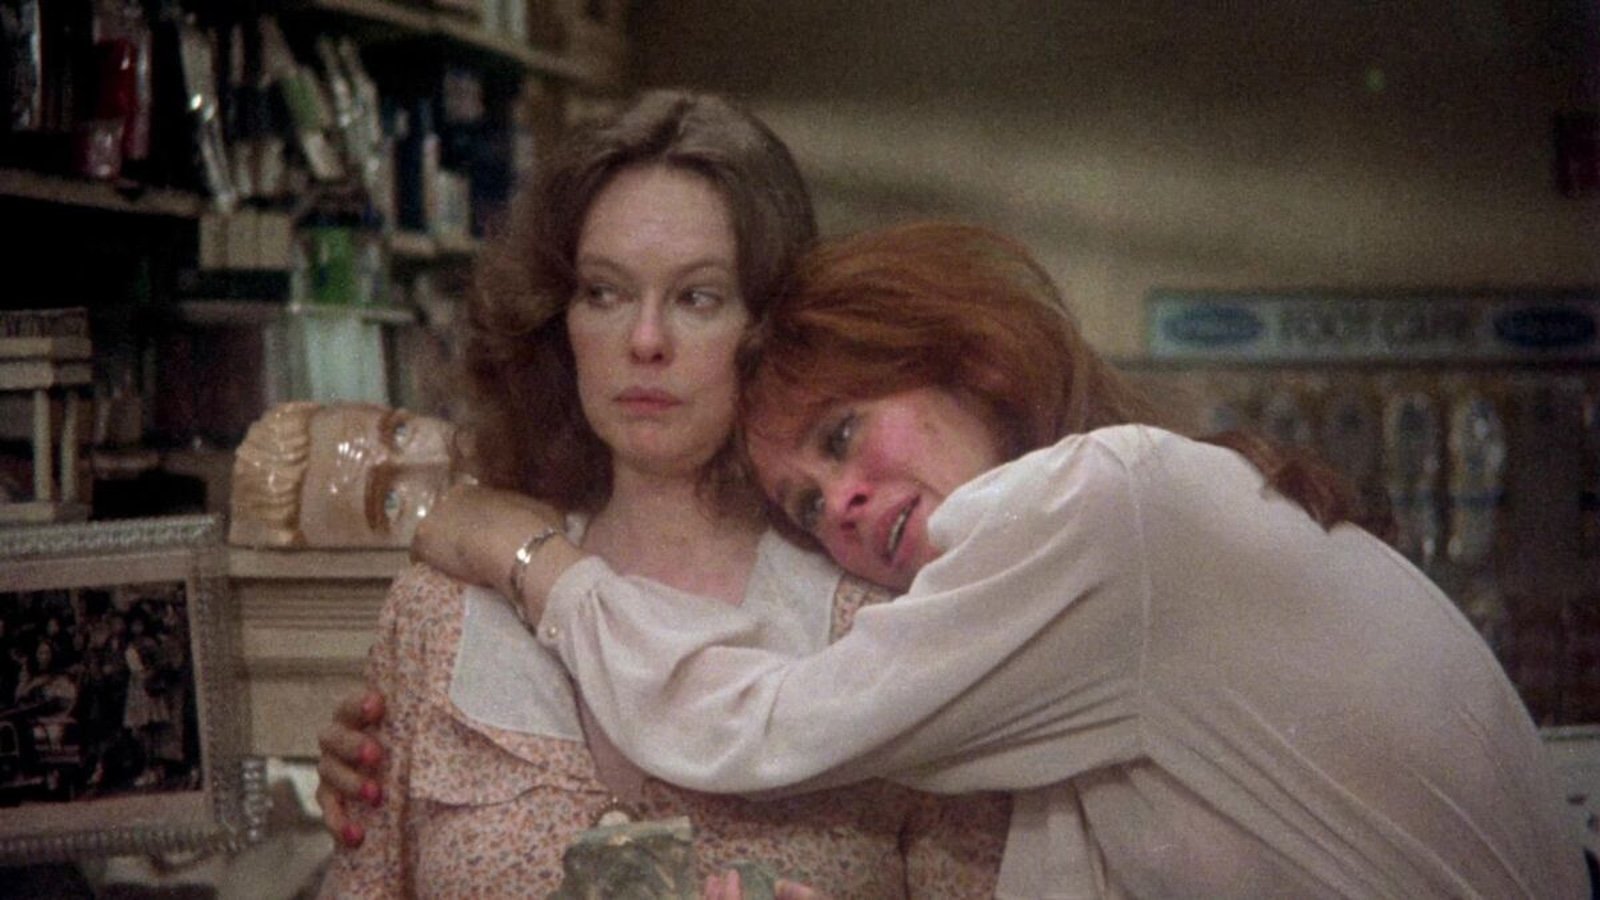 A redheaded woman on white puts her arms around the shoulders of a dark-haired woman in white